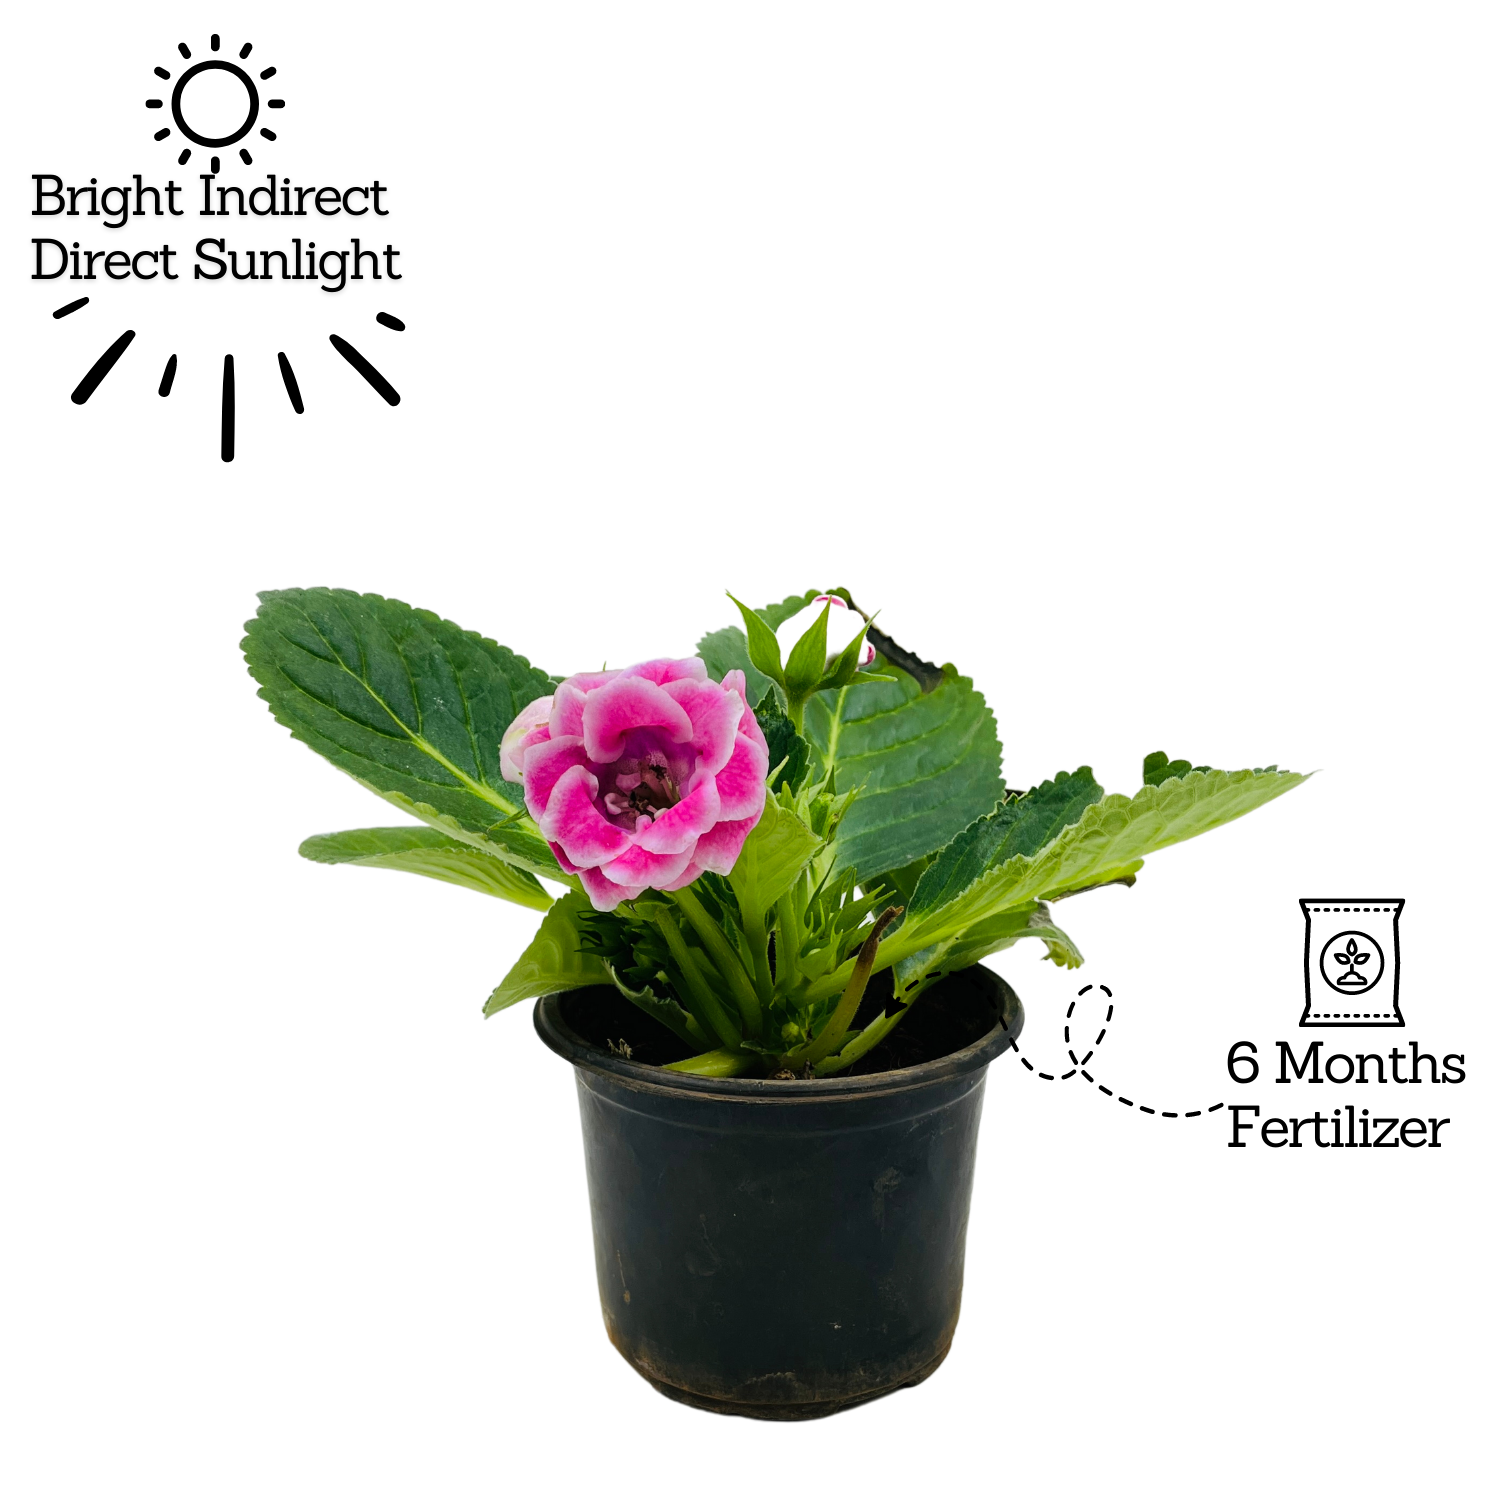 Gloxinia Plant (Any Color)- Live Flowering Plant in 10cm Pot (Home & Garden)